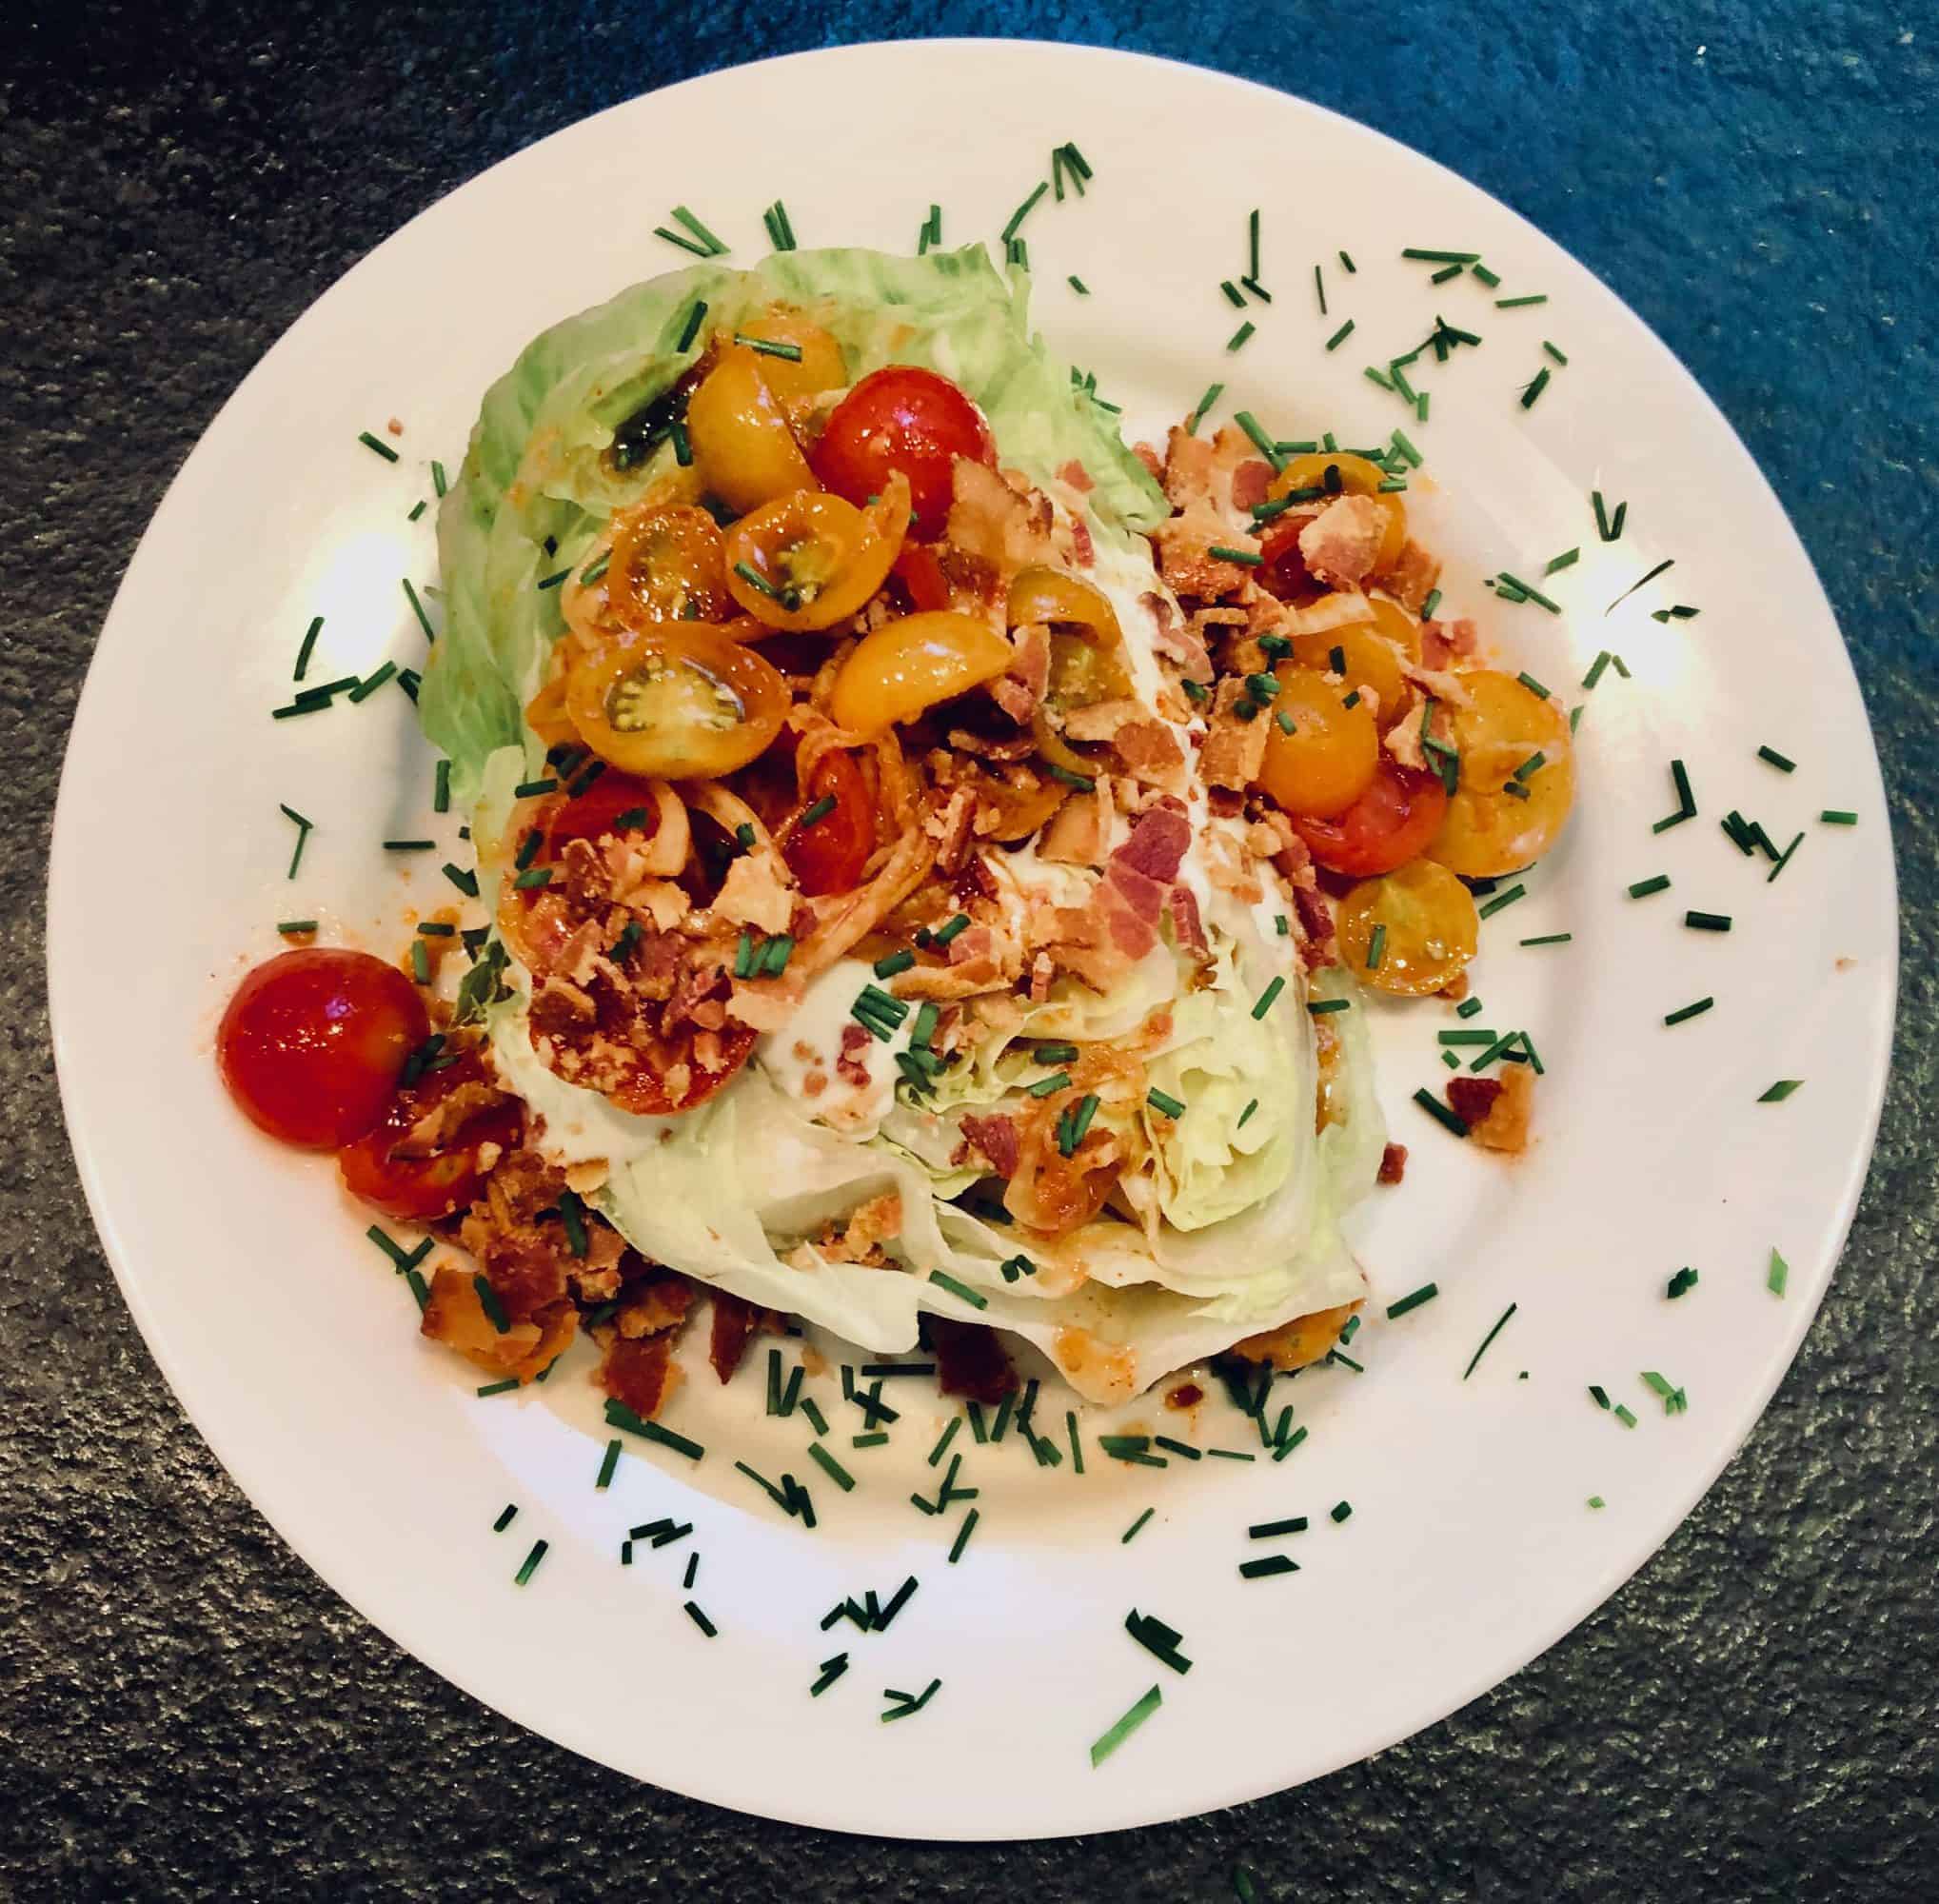 Three Quick Kimchi Vegetables and a Classic Wedge Salad transformed by one of them.